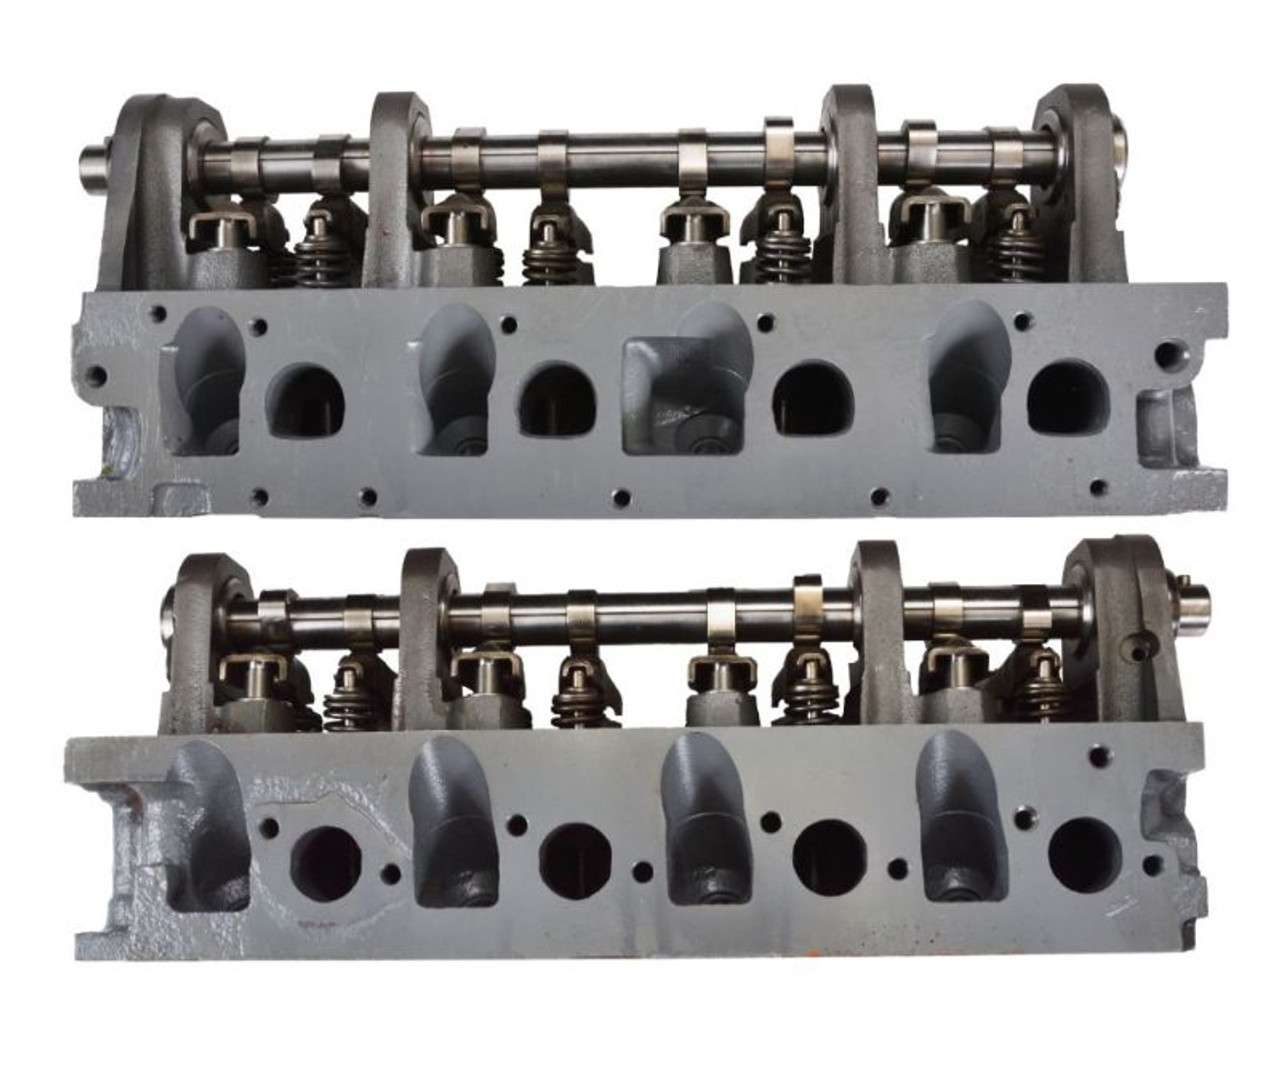 Cylinder Head Assembly - 1999 Ford Ranger 2.5L (CH1019R.A6)